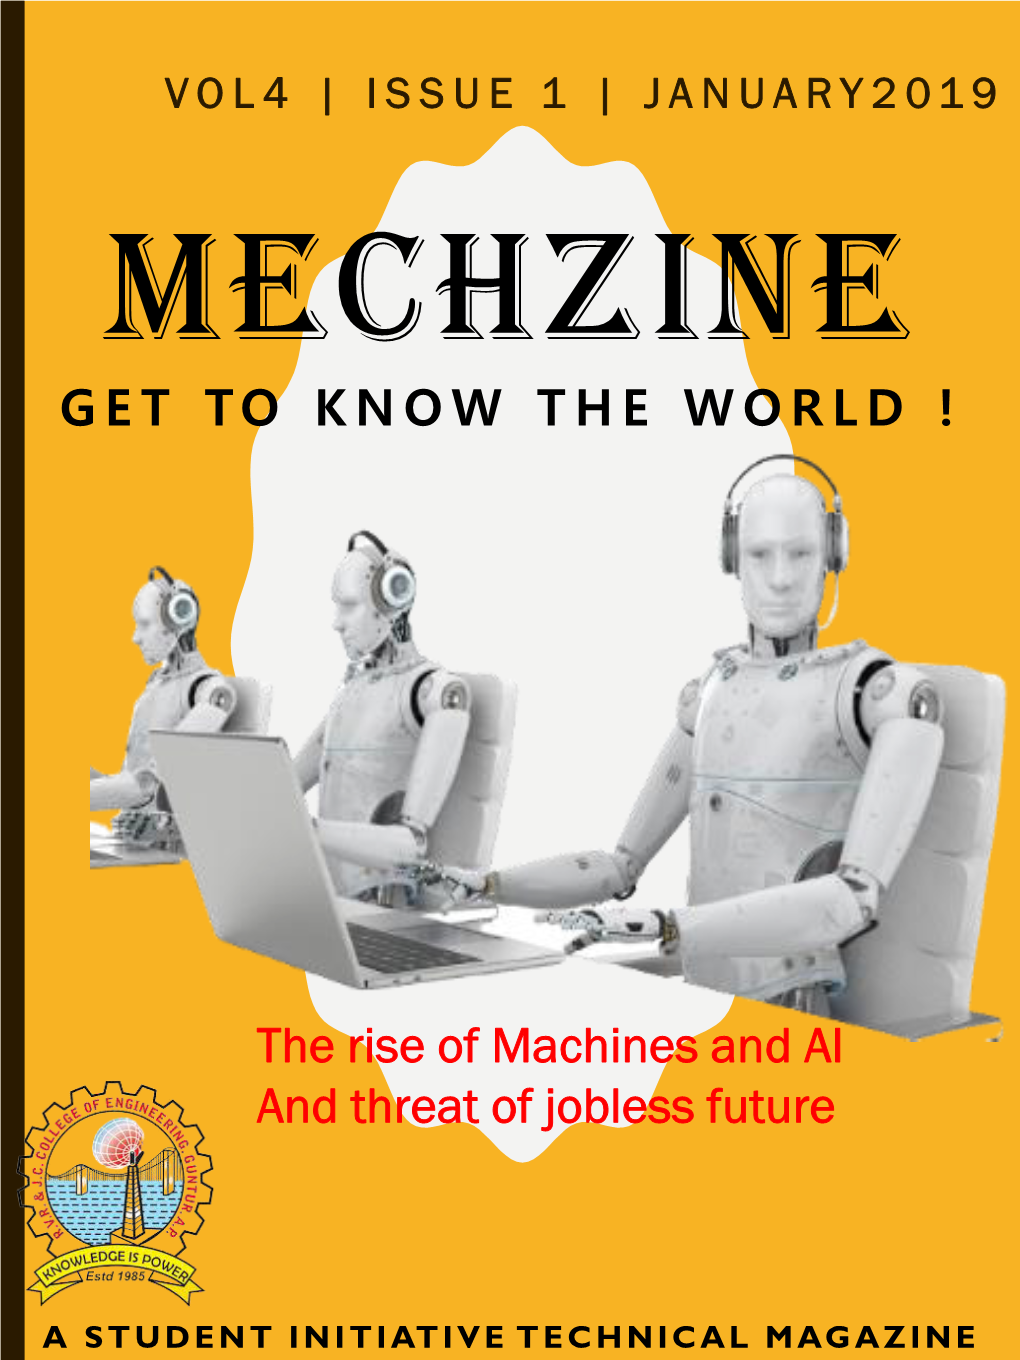 The Rise of Machines and AI and Threat of Jobless Future